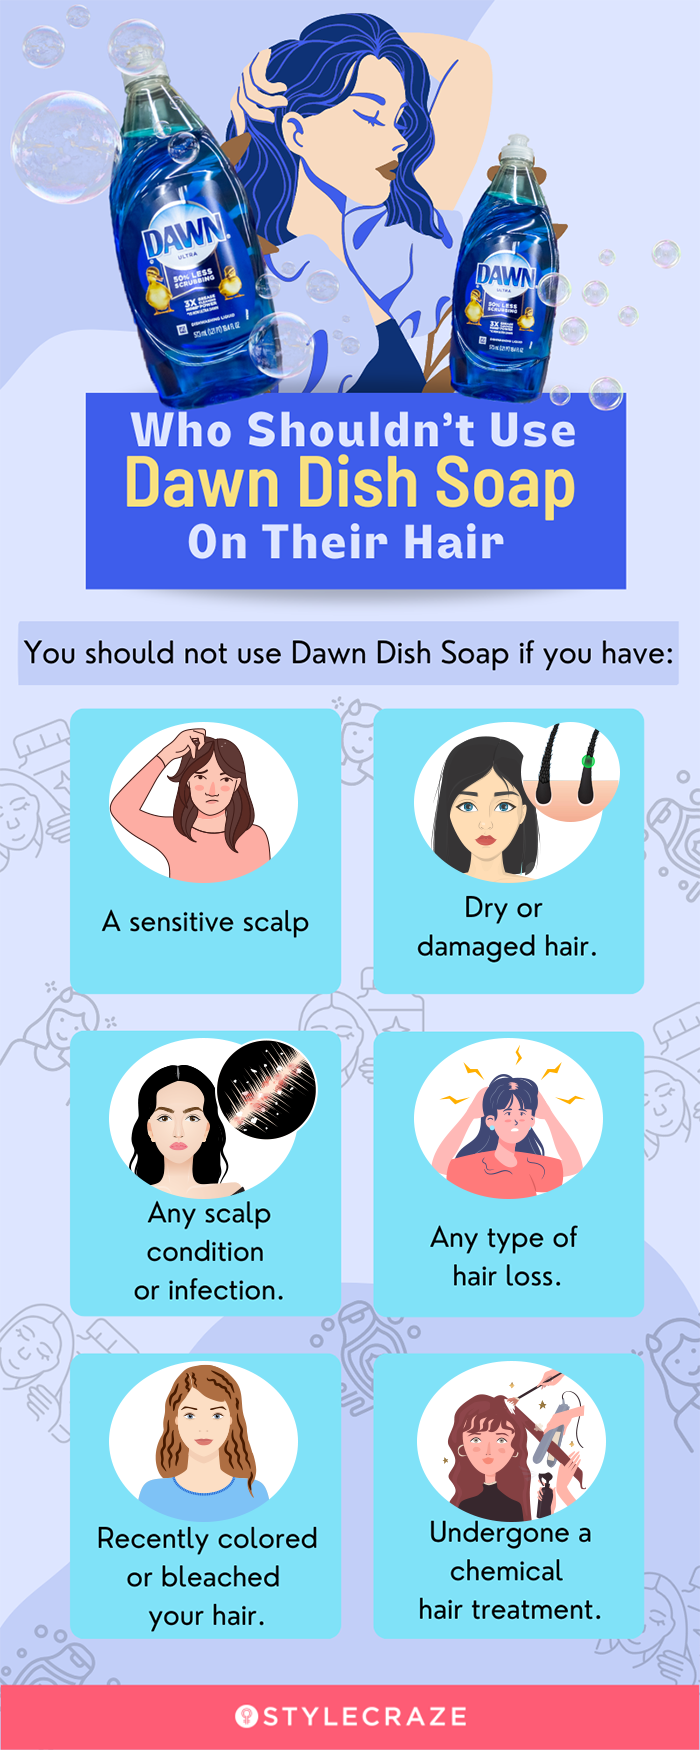 who shouldn’t use dawn dish soap on their hair [infographic]